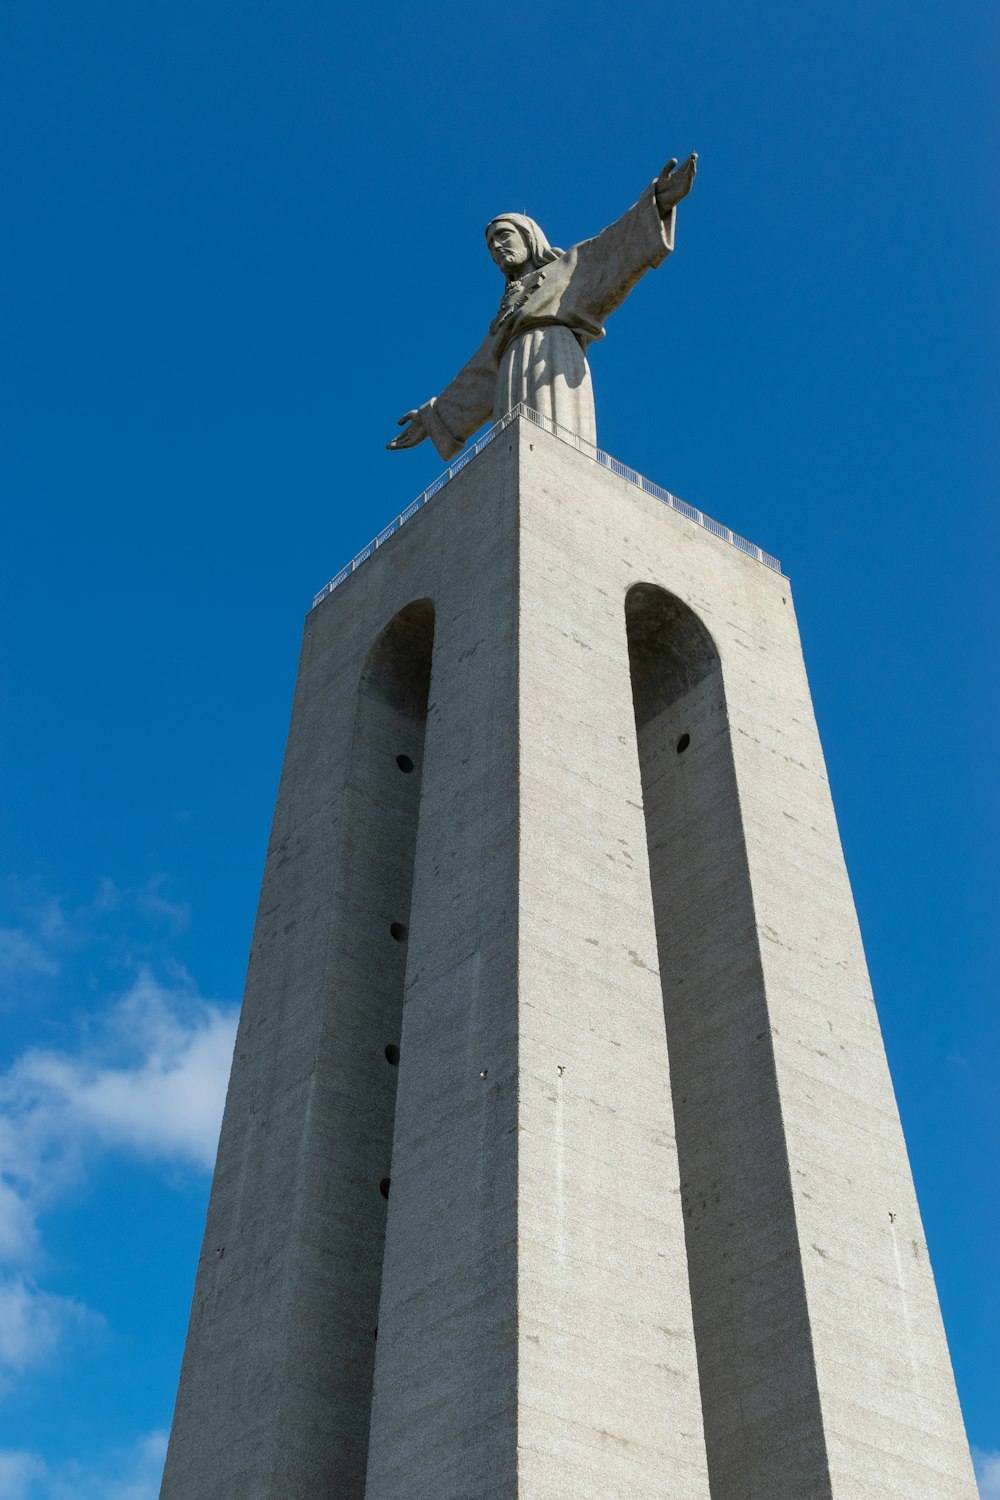 a statue of jesus on top of a tall building